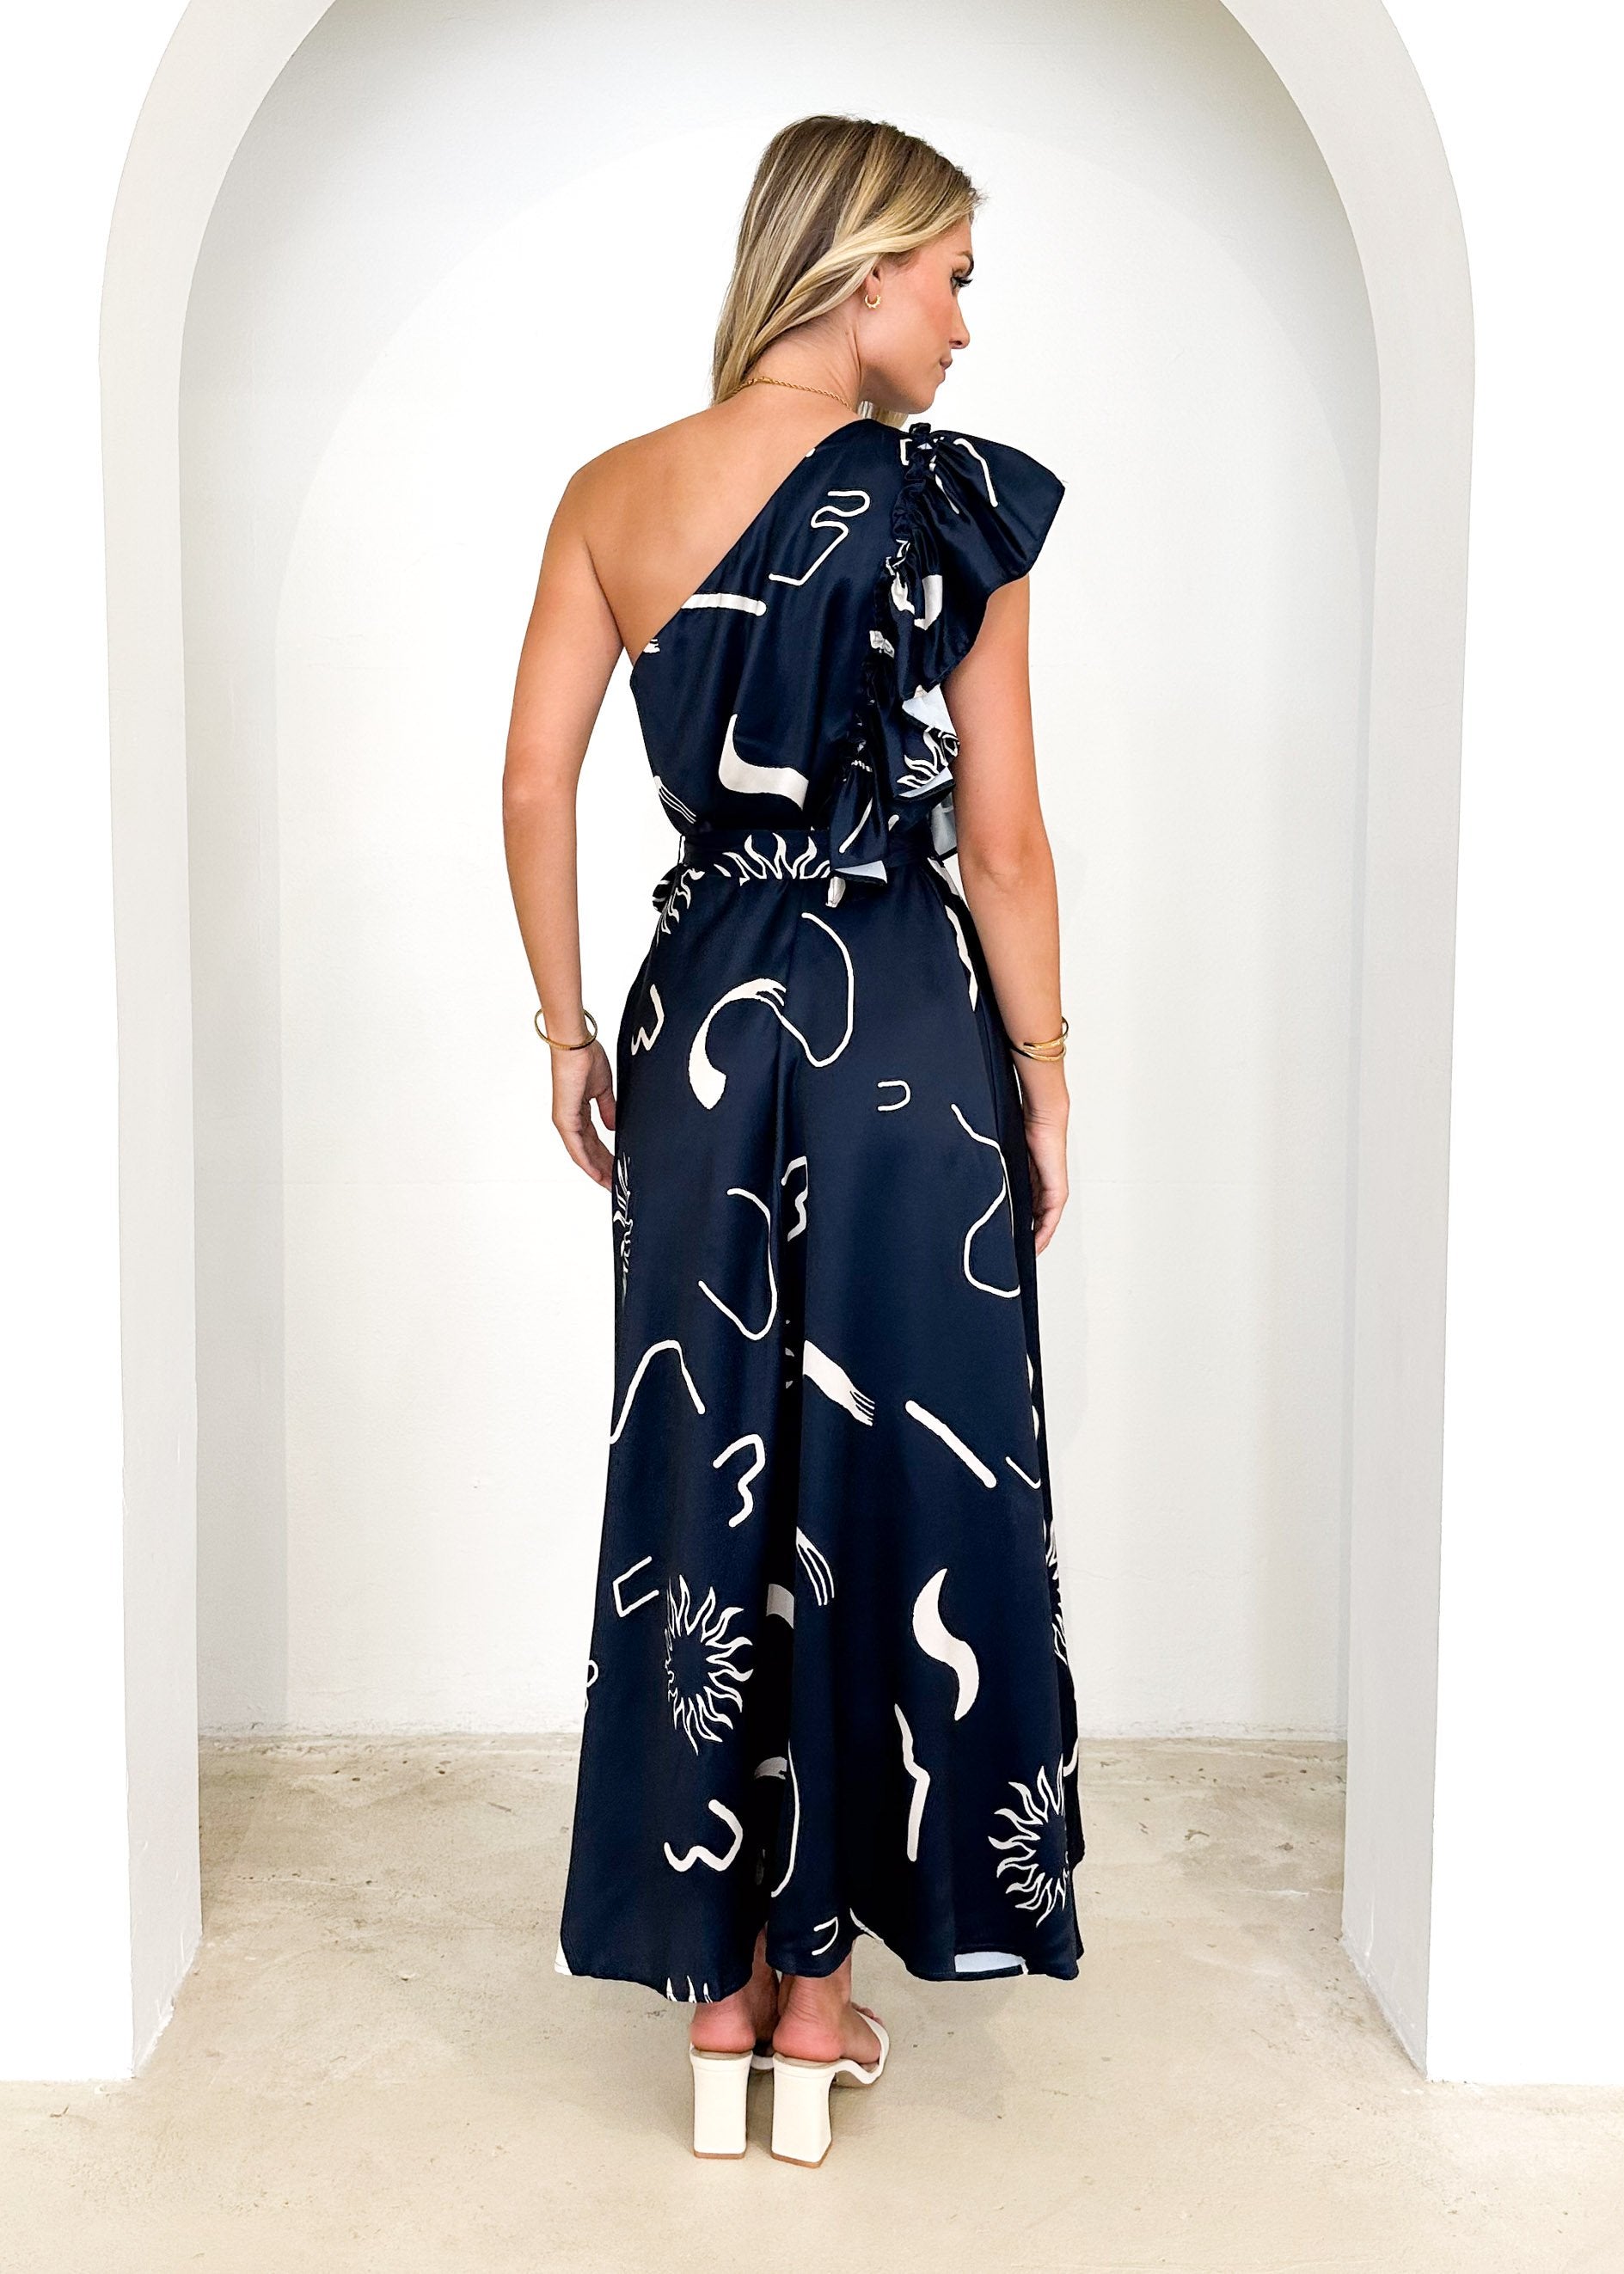 Rowler One Shoulder Midi Dress - Navy Abstract